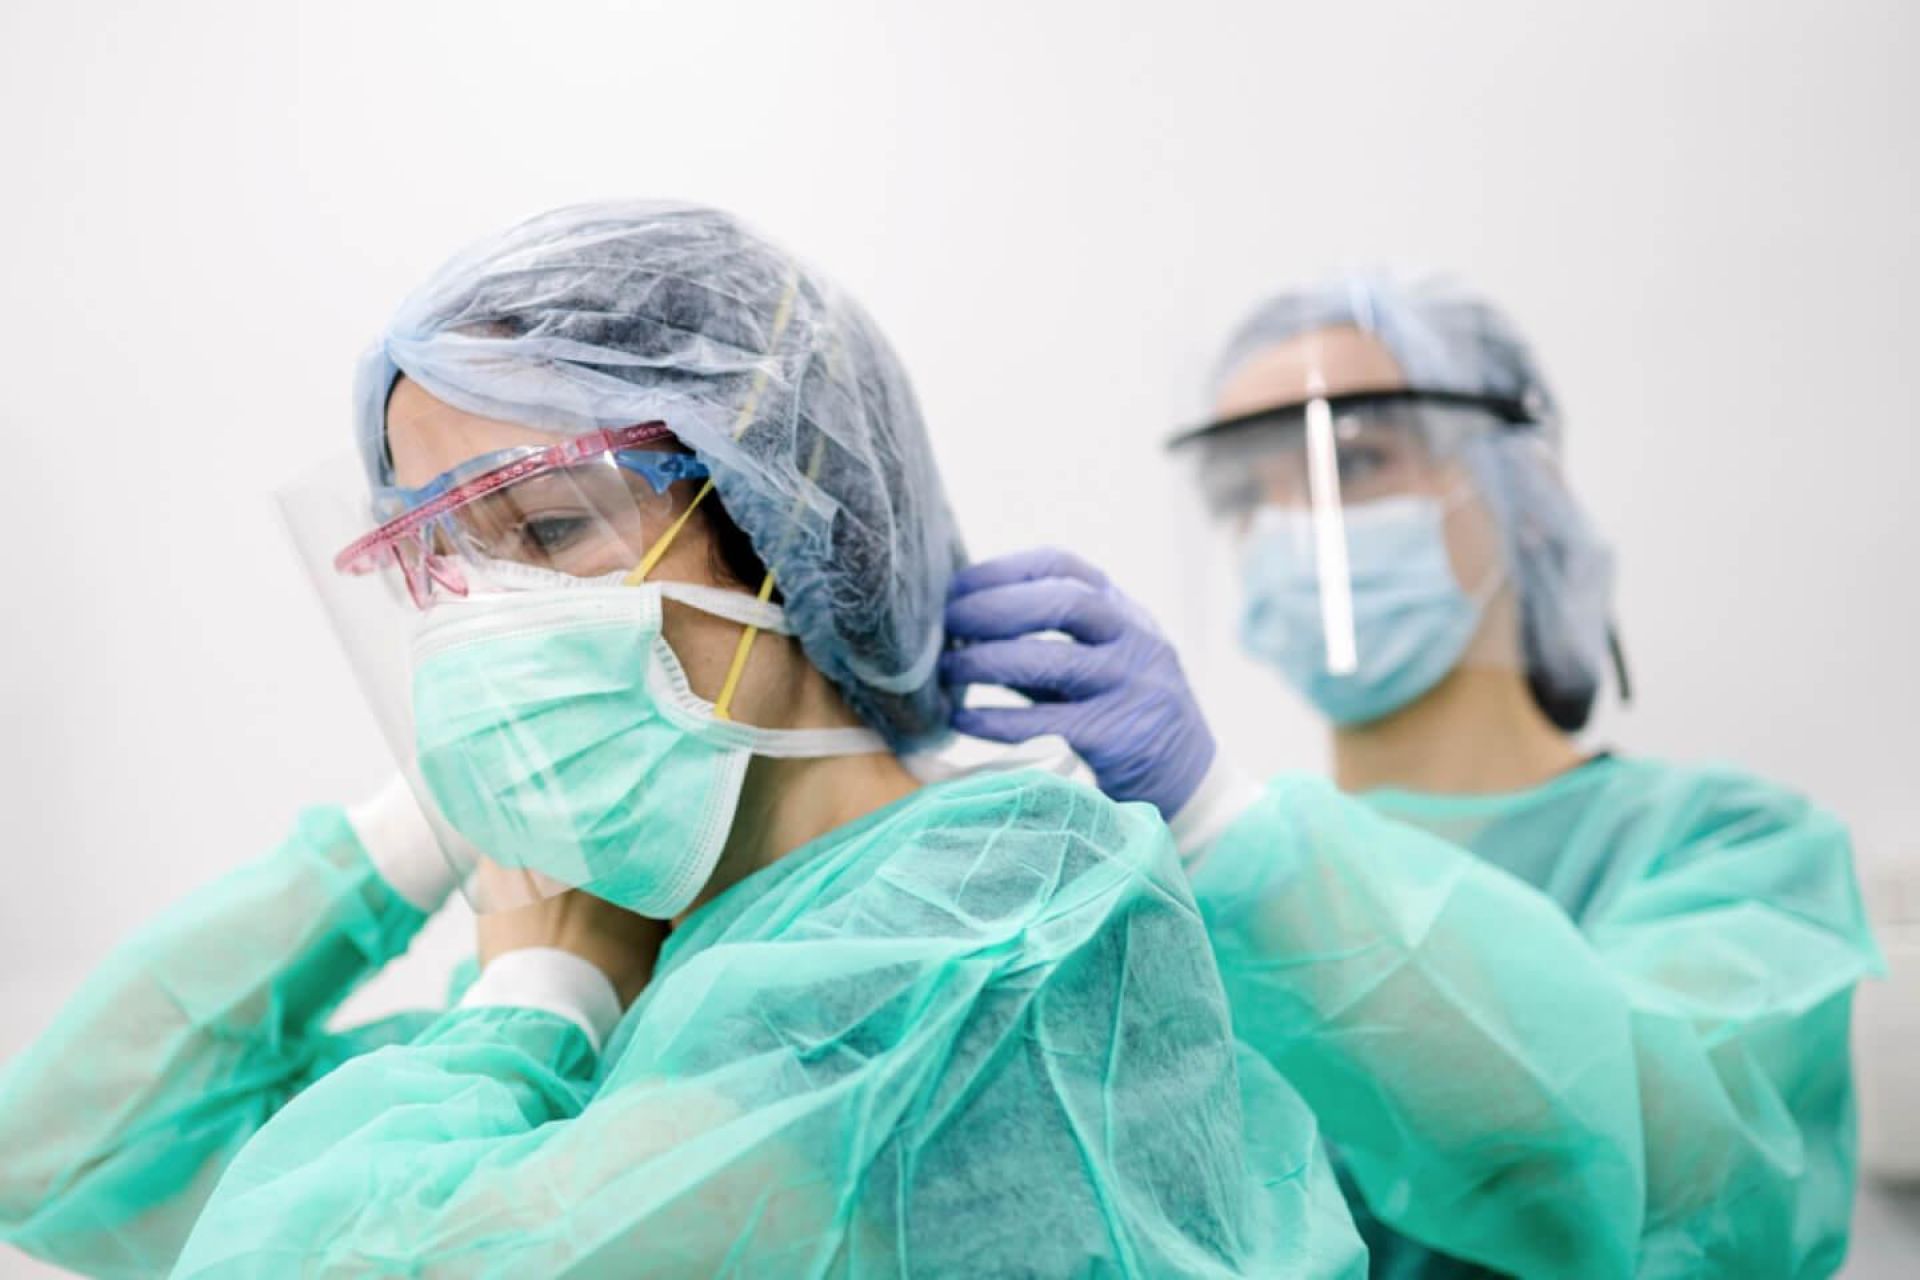 Two surgeons prepare ppe for each other